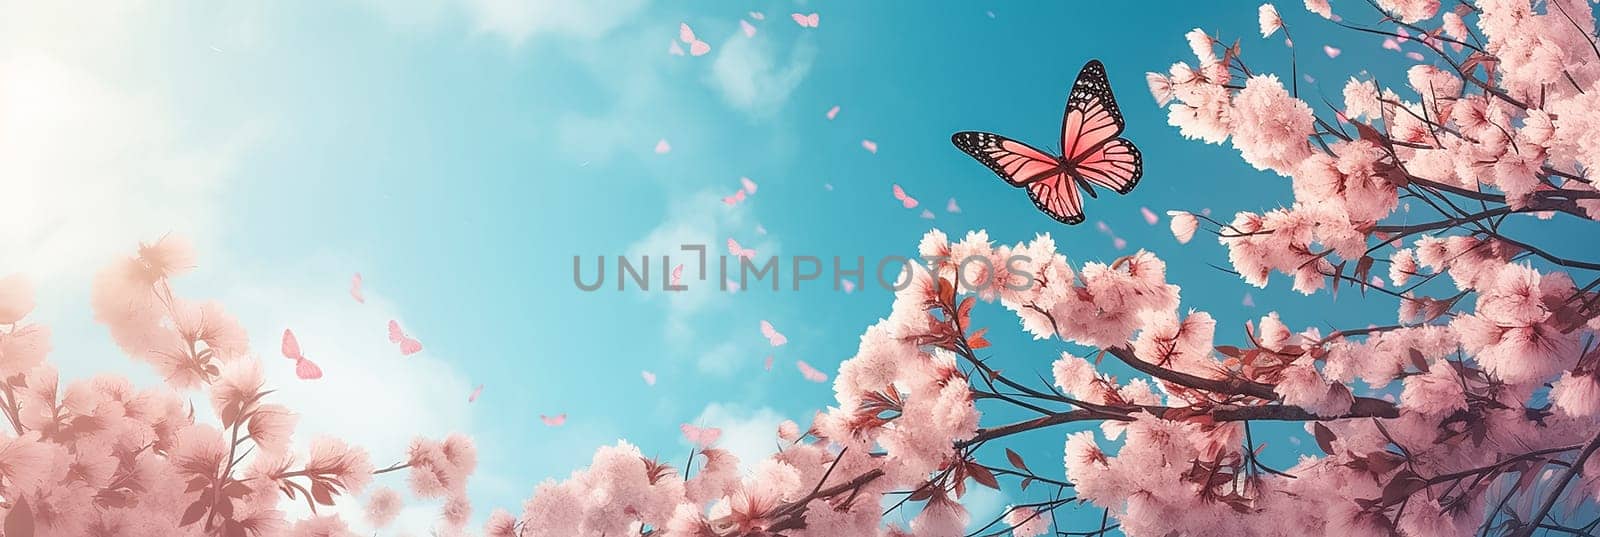 The butterfly is flies by Pink cherry blossoms branch on the blurred blue sky background. Long banner with Spring flowers of cherries tree by esvetleishaya